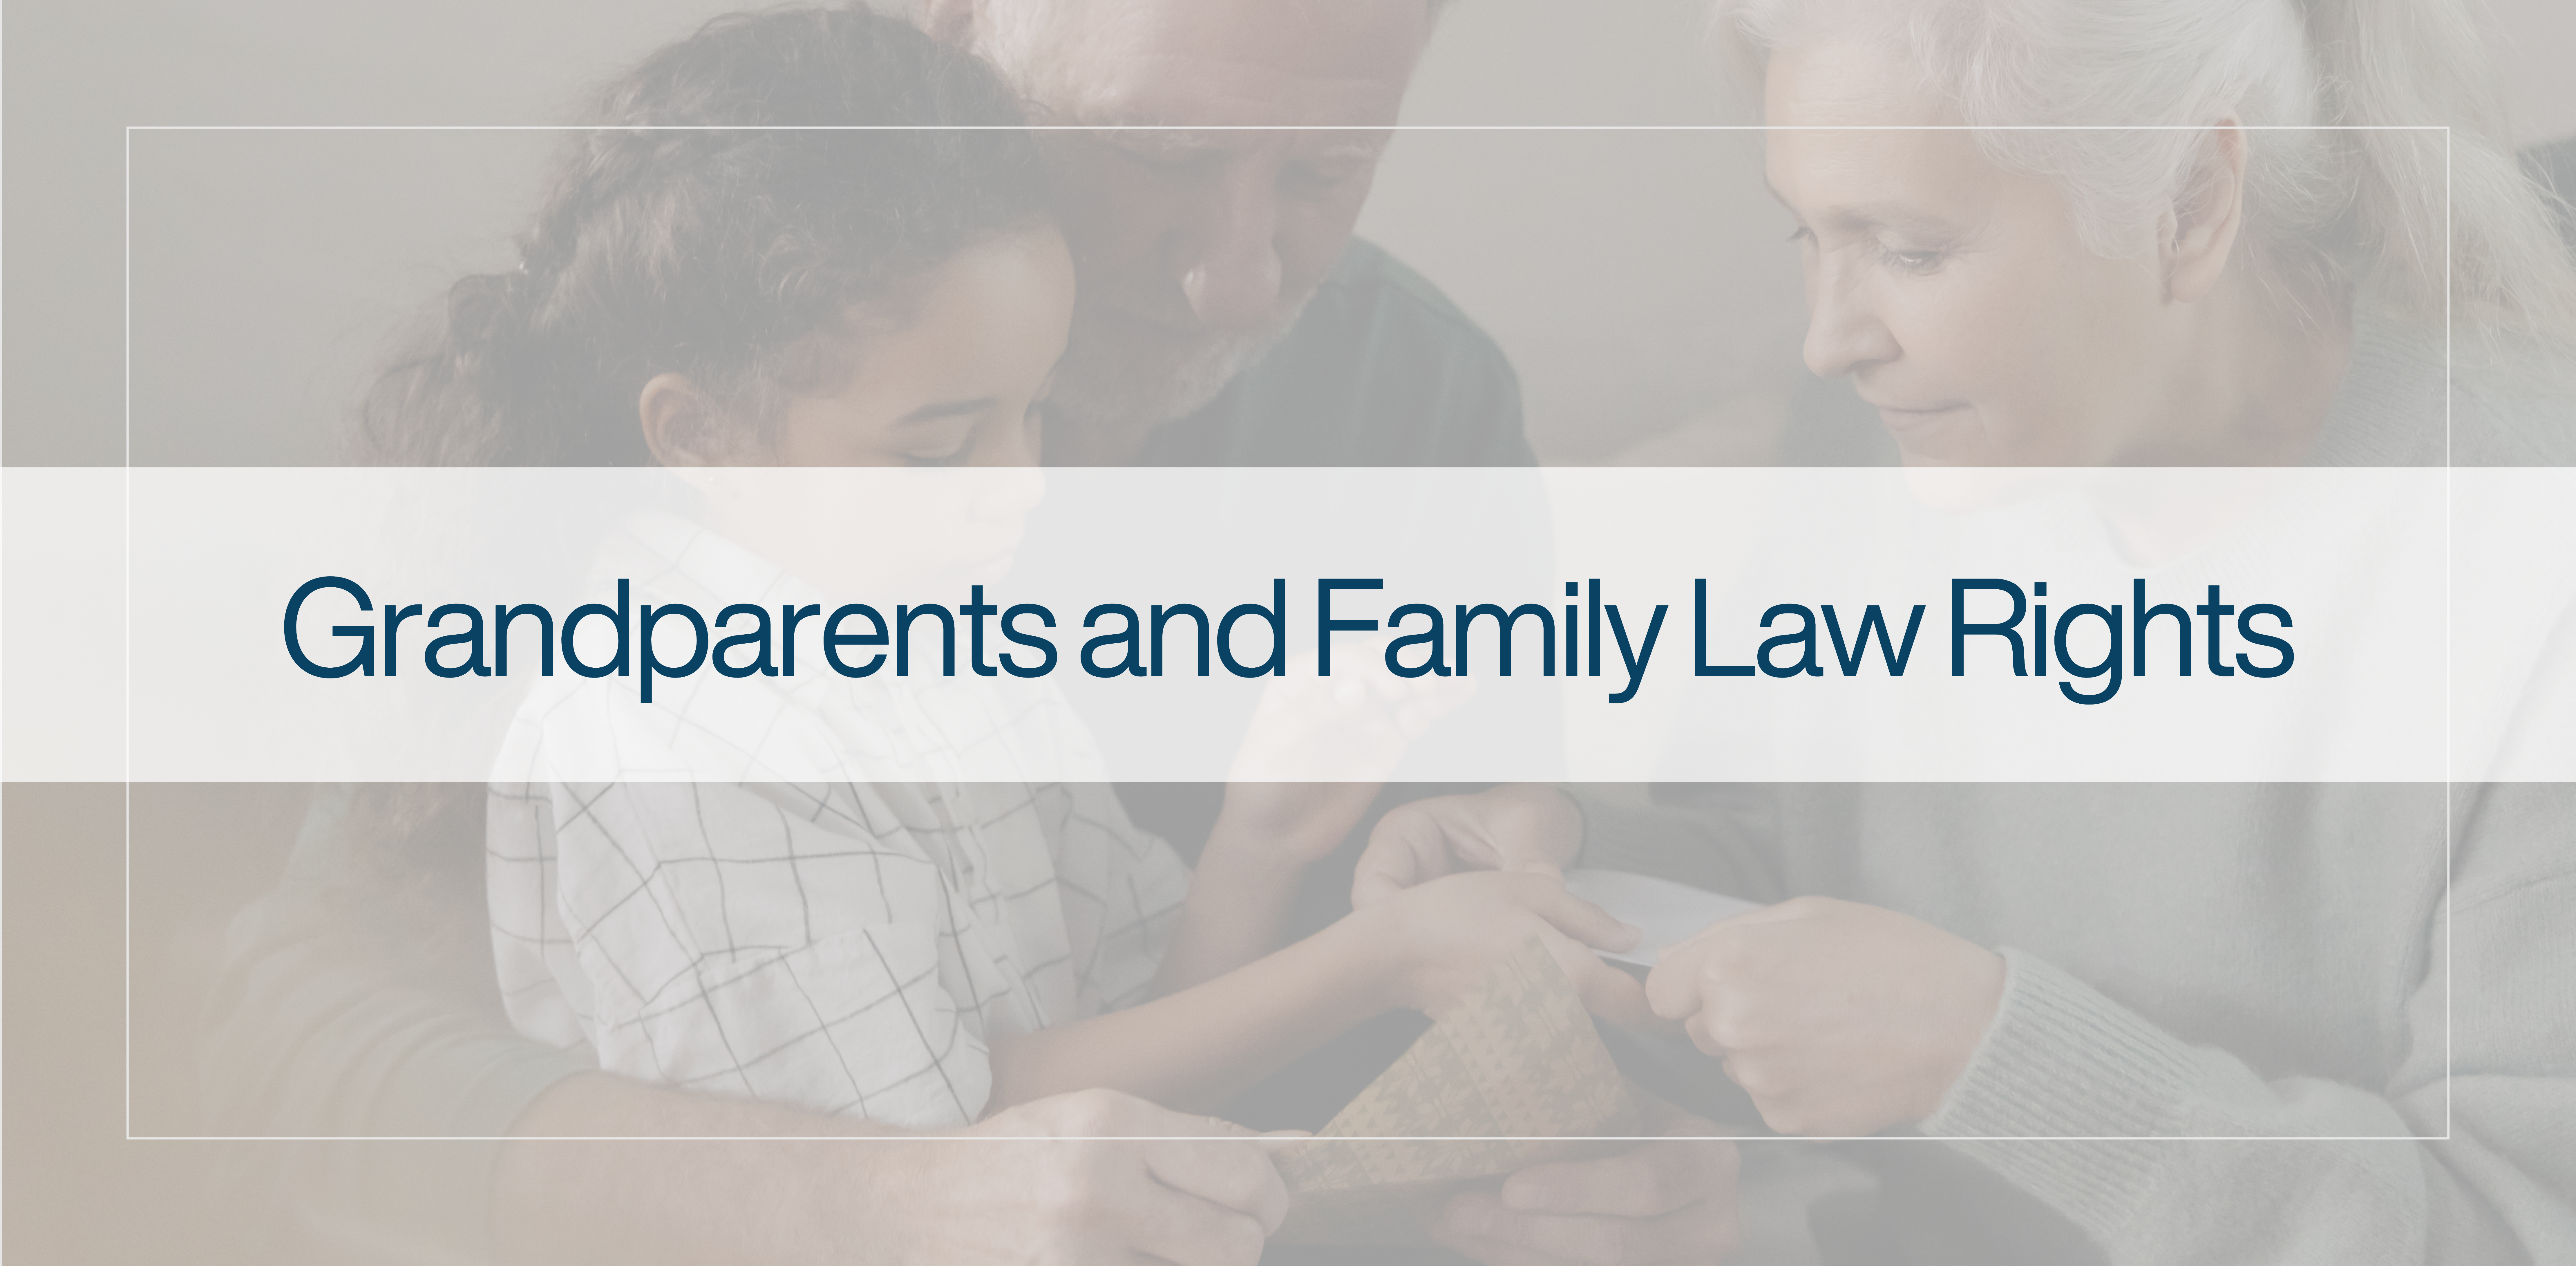 Grandparents and Family Law Rights